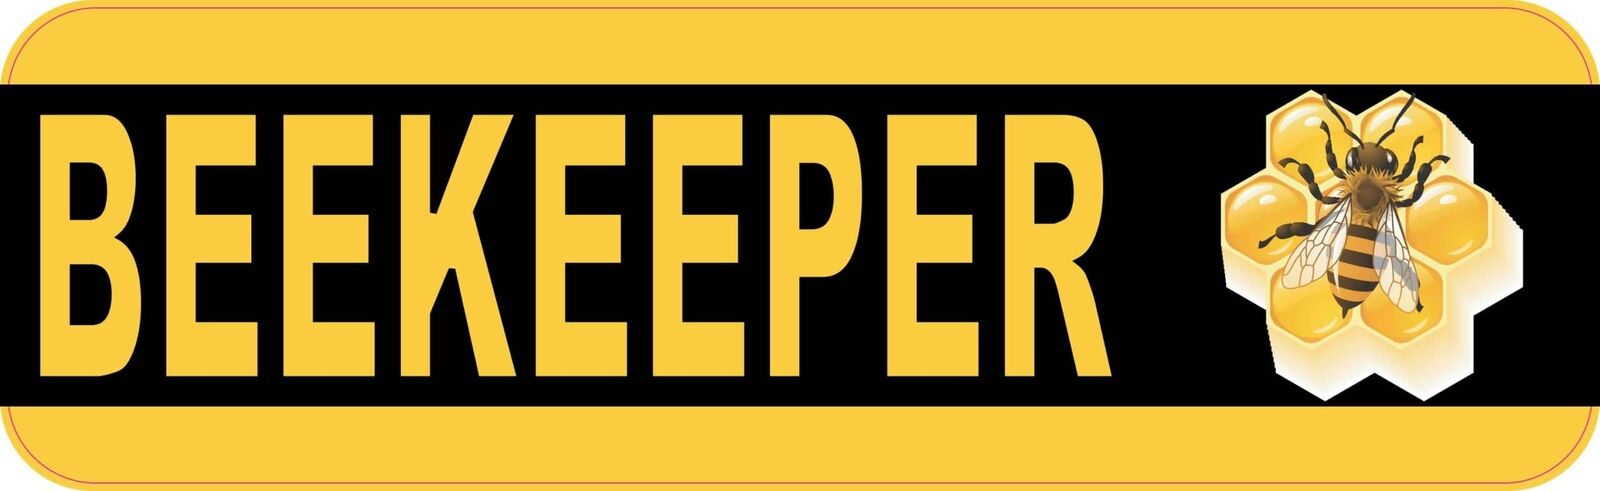 10in x 3in Black and Yellow Beekeeper Magnet